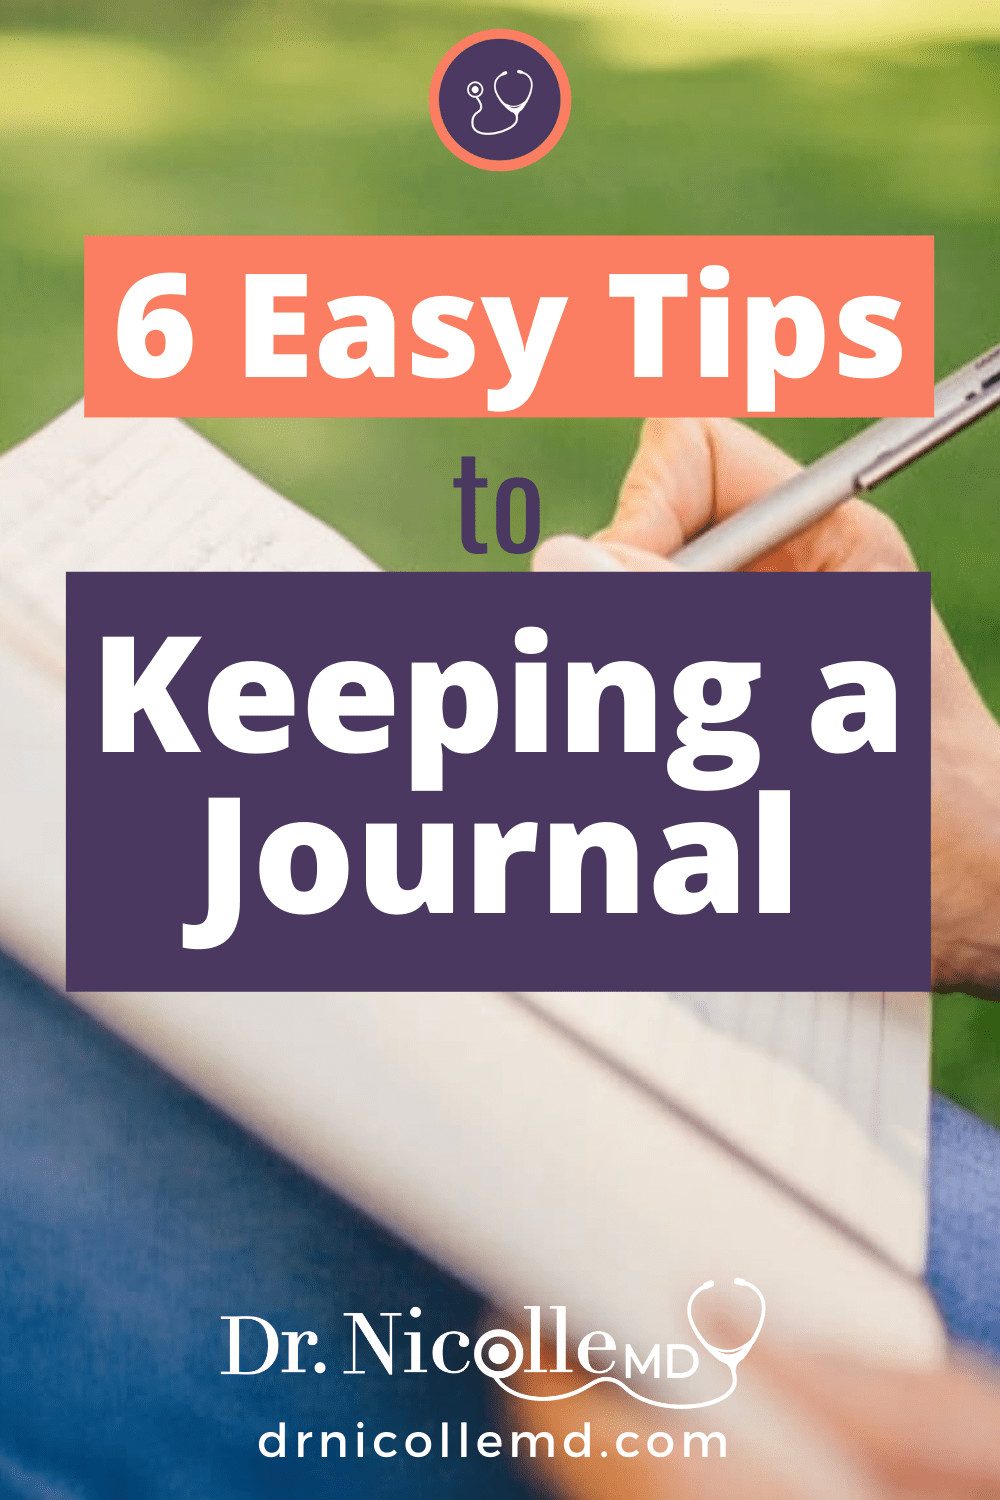 6 Easy Tips to Keeping a Journal